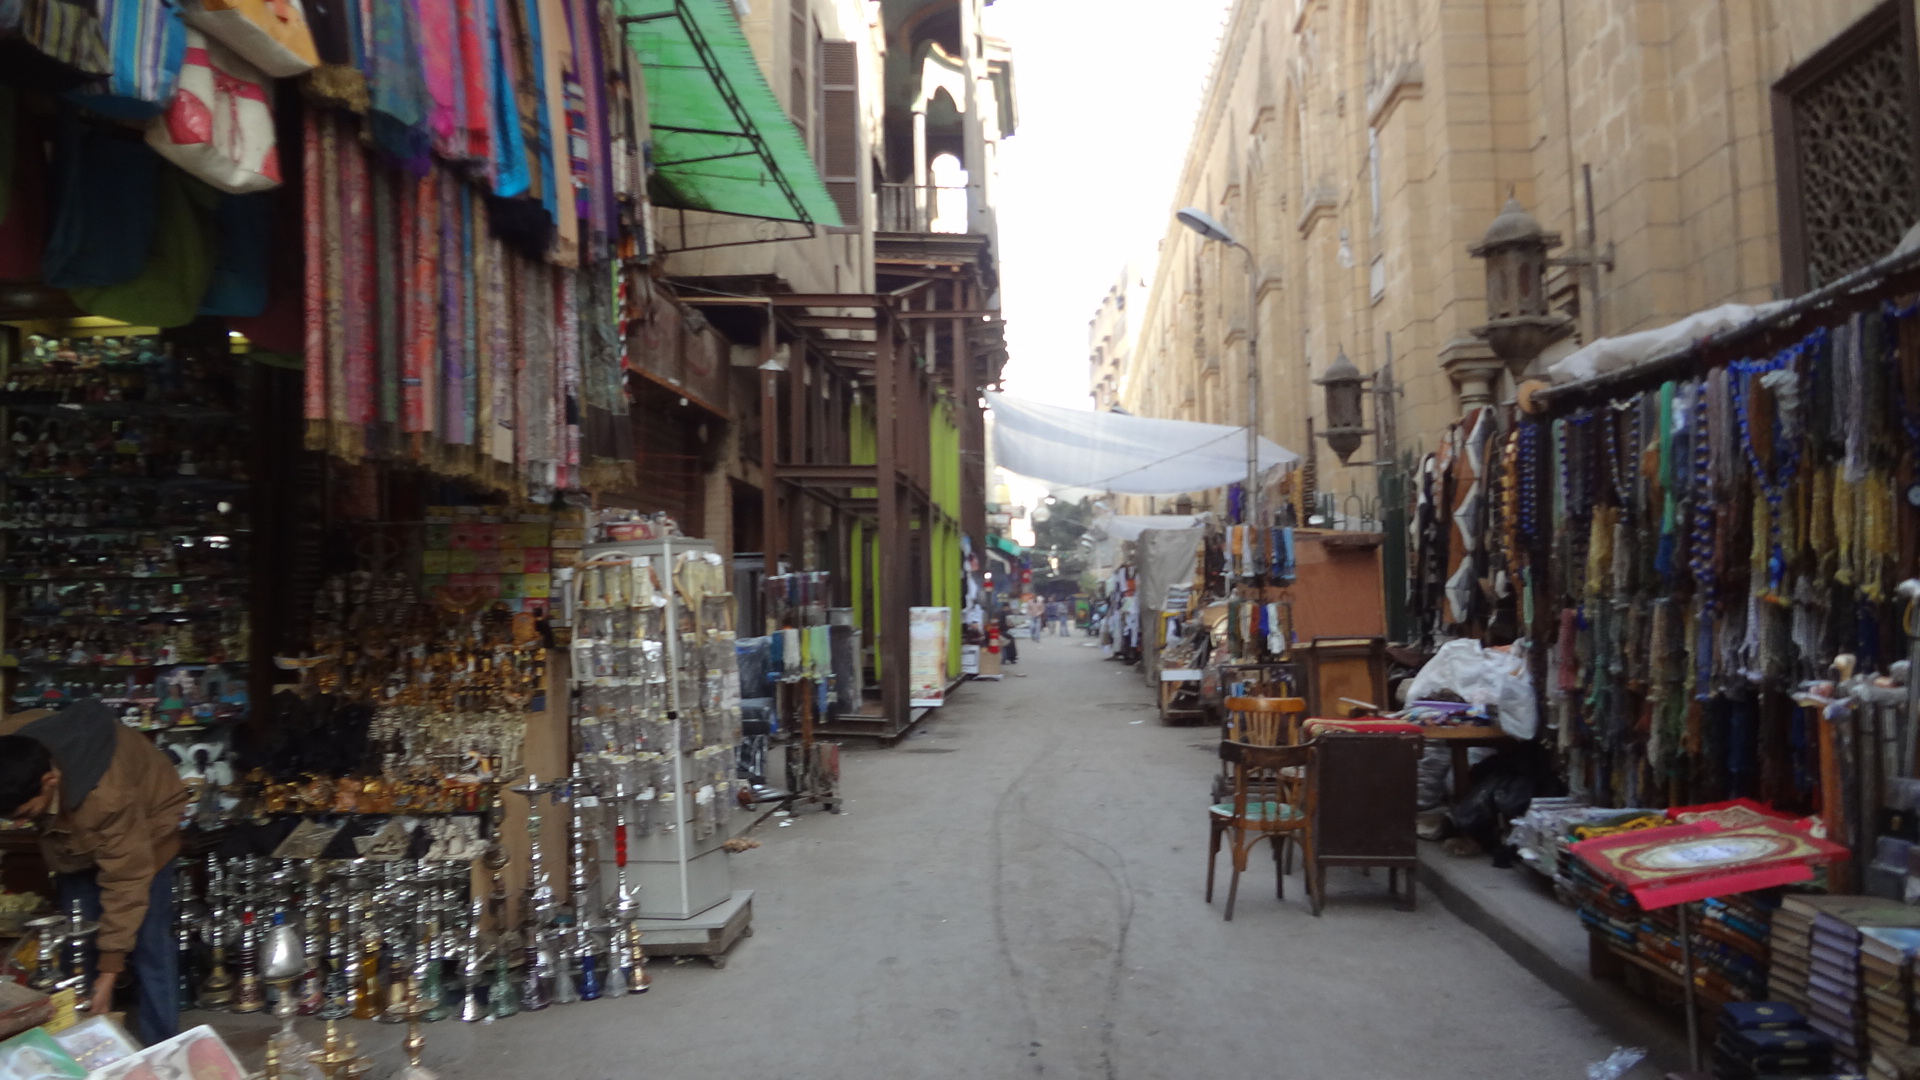 Monuments Sight Seeing Attractions Khan ElKhalili Market